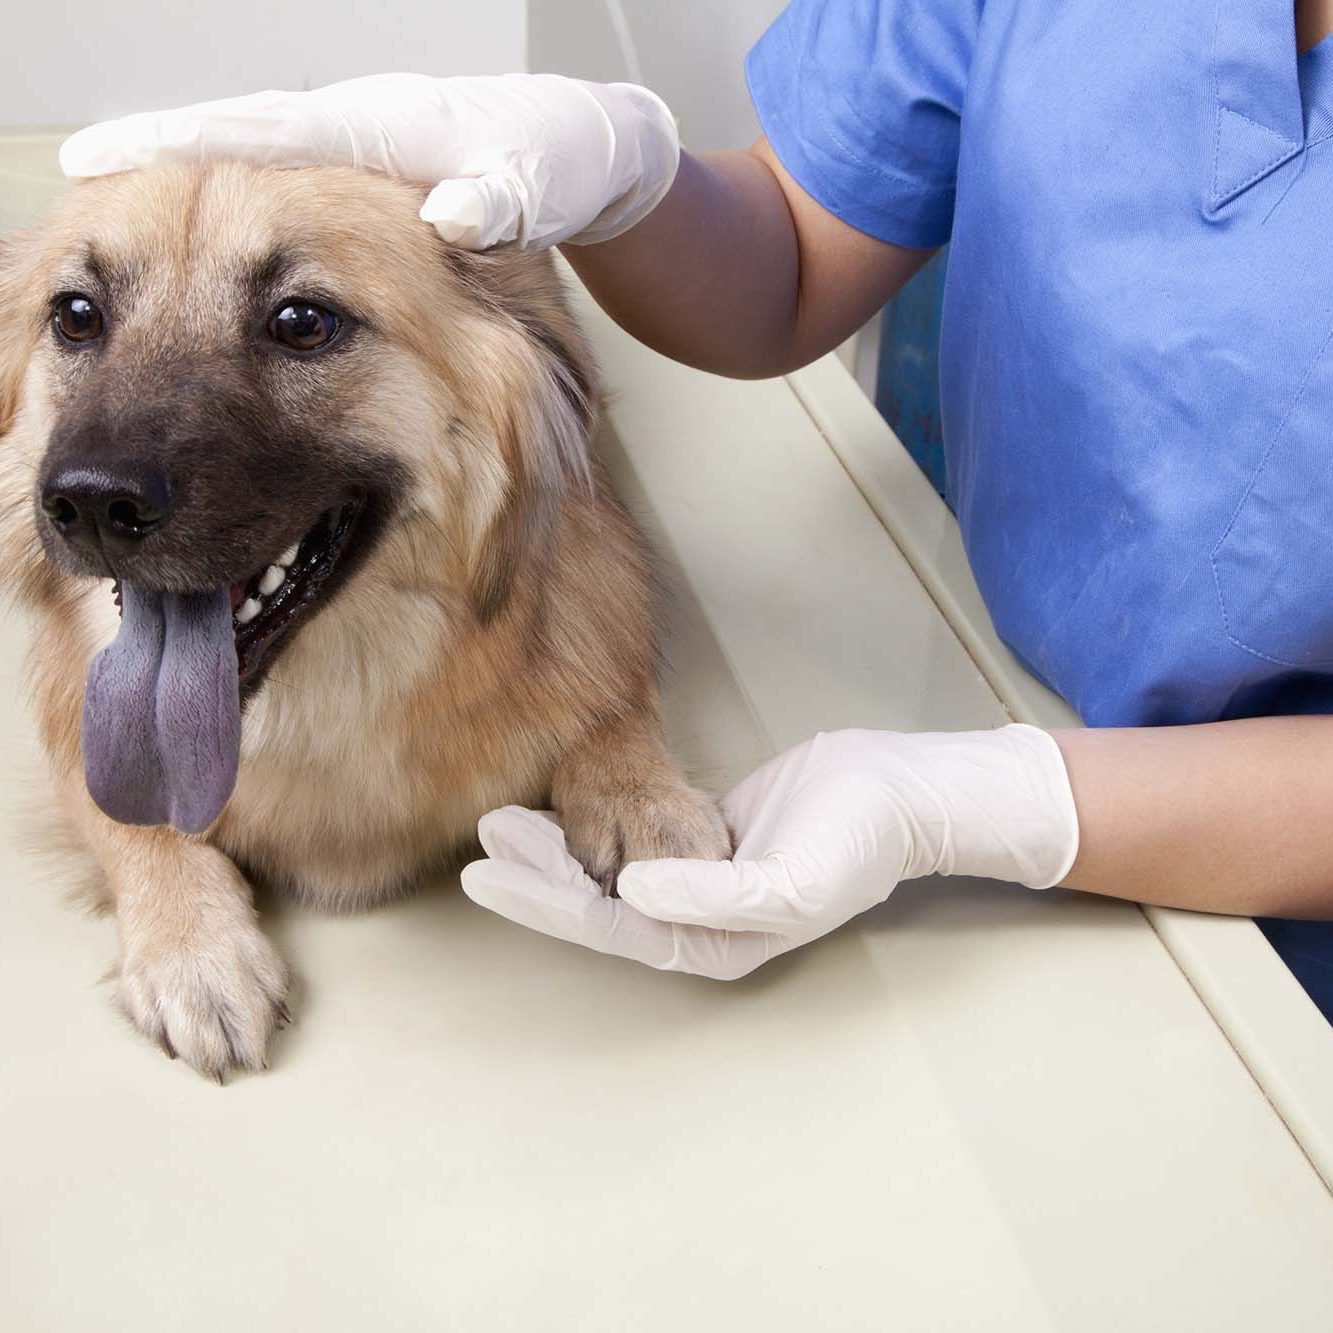 Veterinarian with dog in examination room